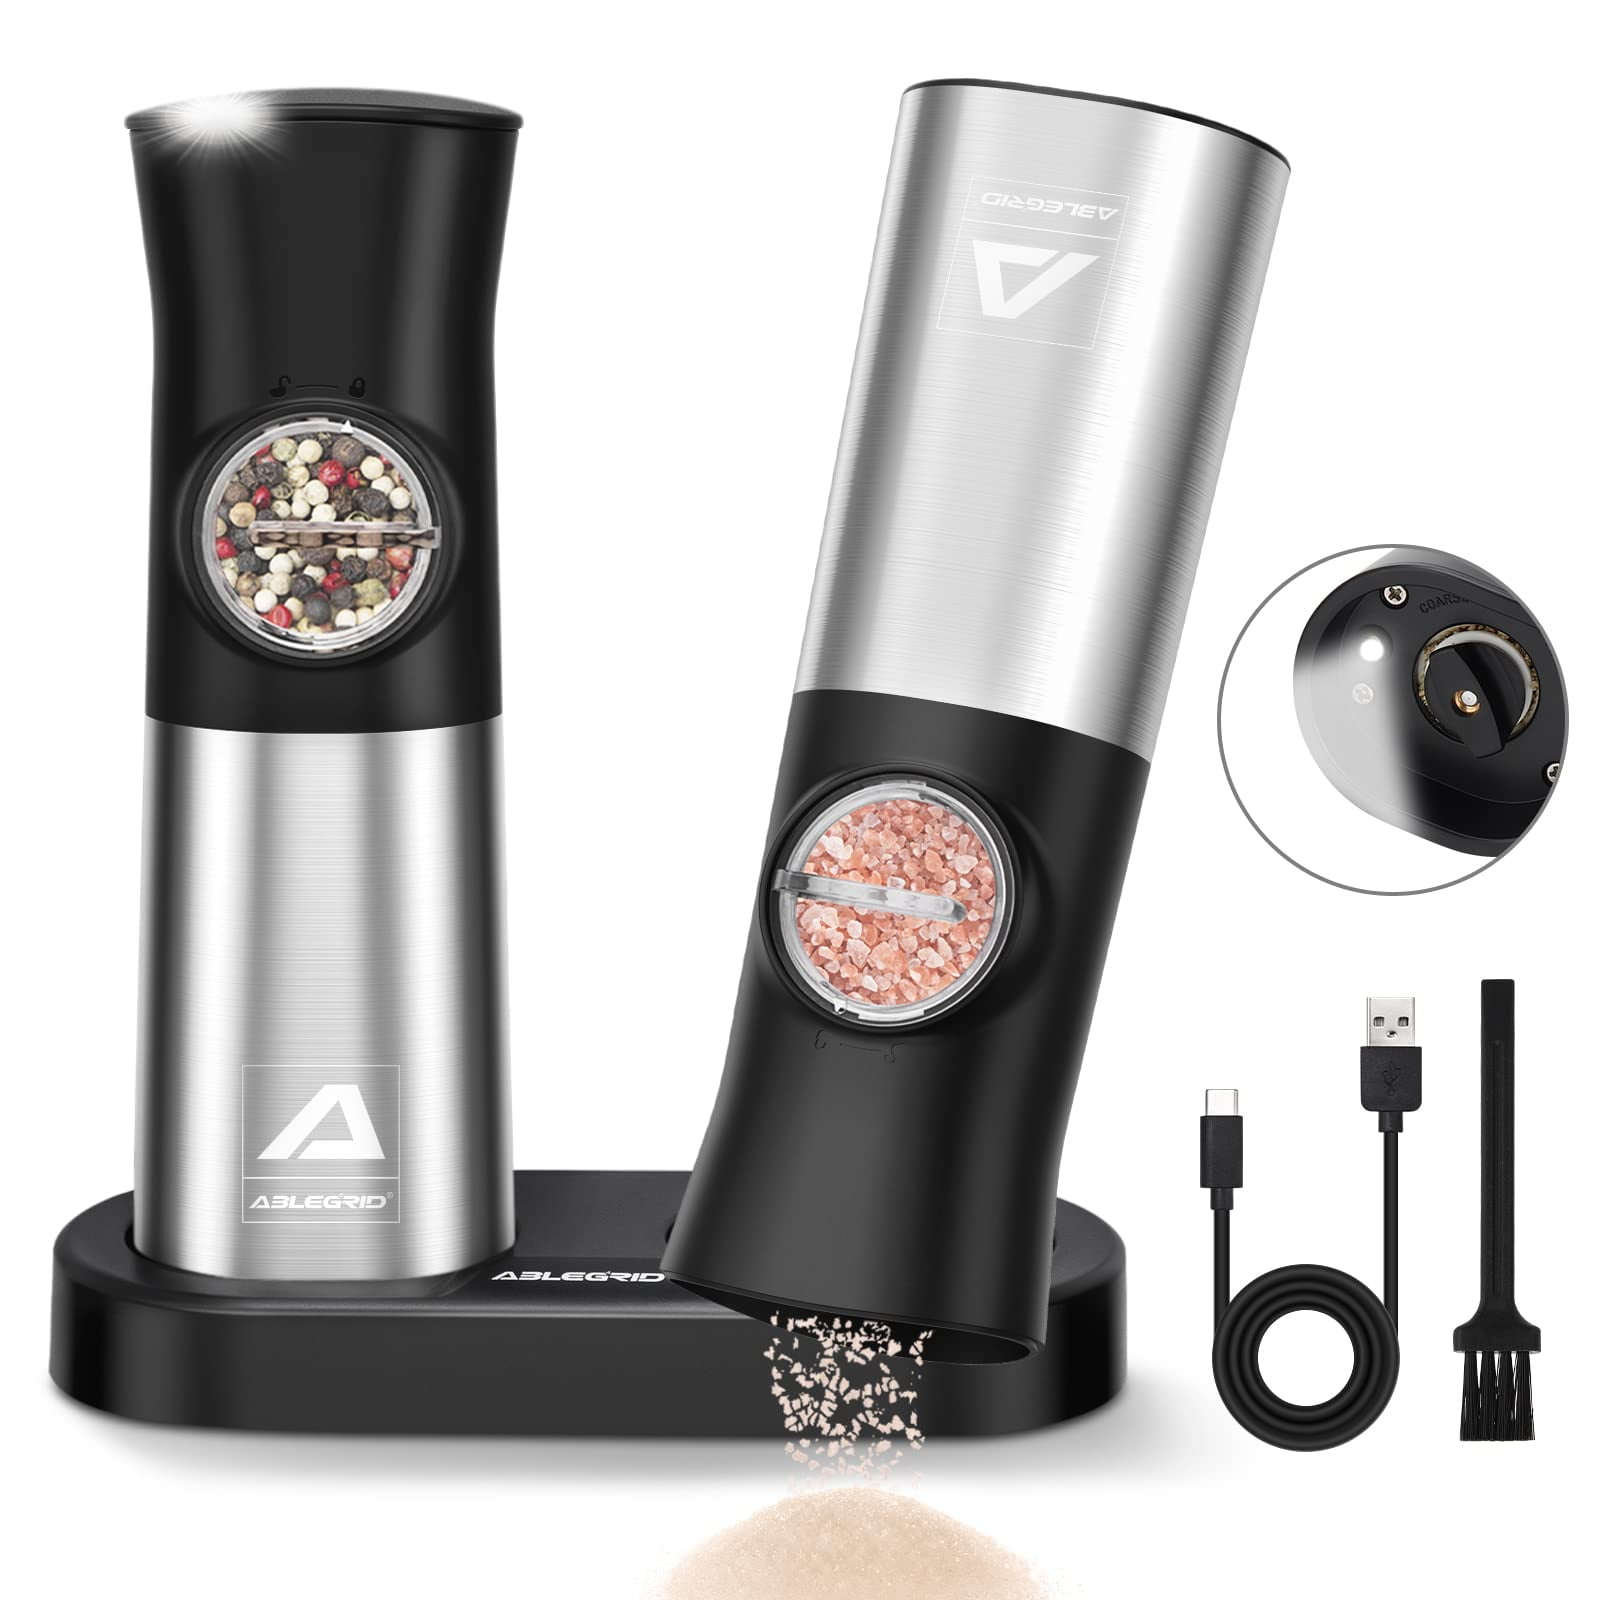 Homchum Gravity Electric Salt and Pepper Grinder Set, Automatic Pepper and  Salt Mill Grinder Battery-Operated with Adjustable Coarseness, LED Light